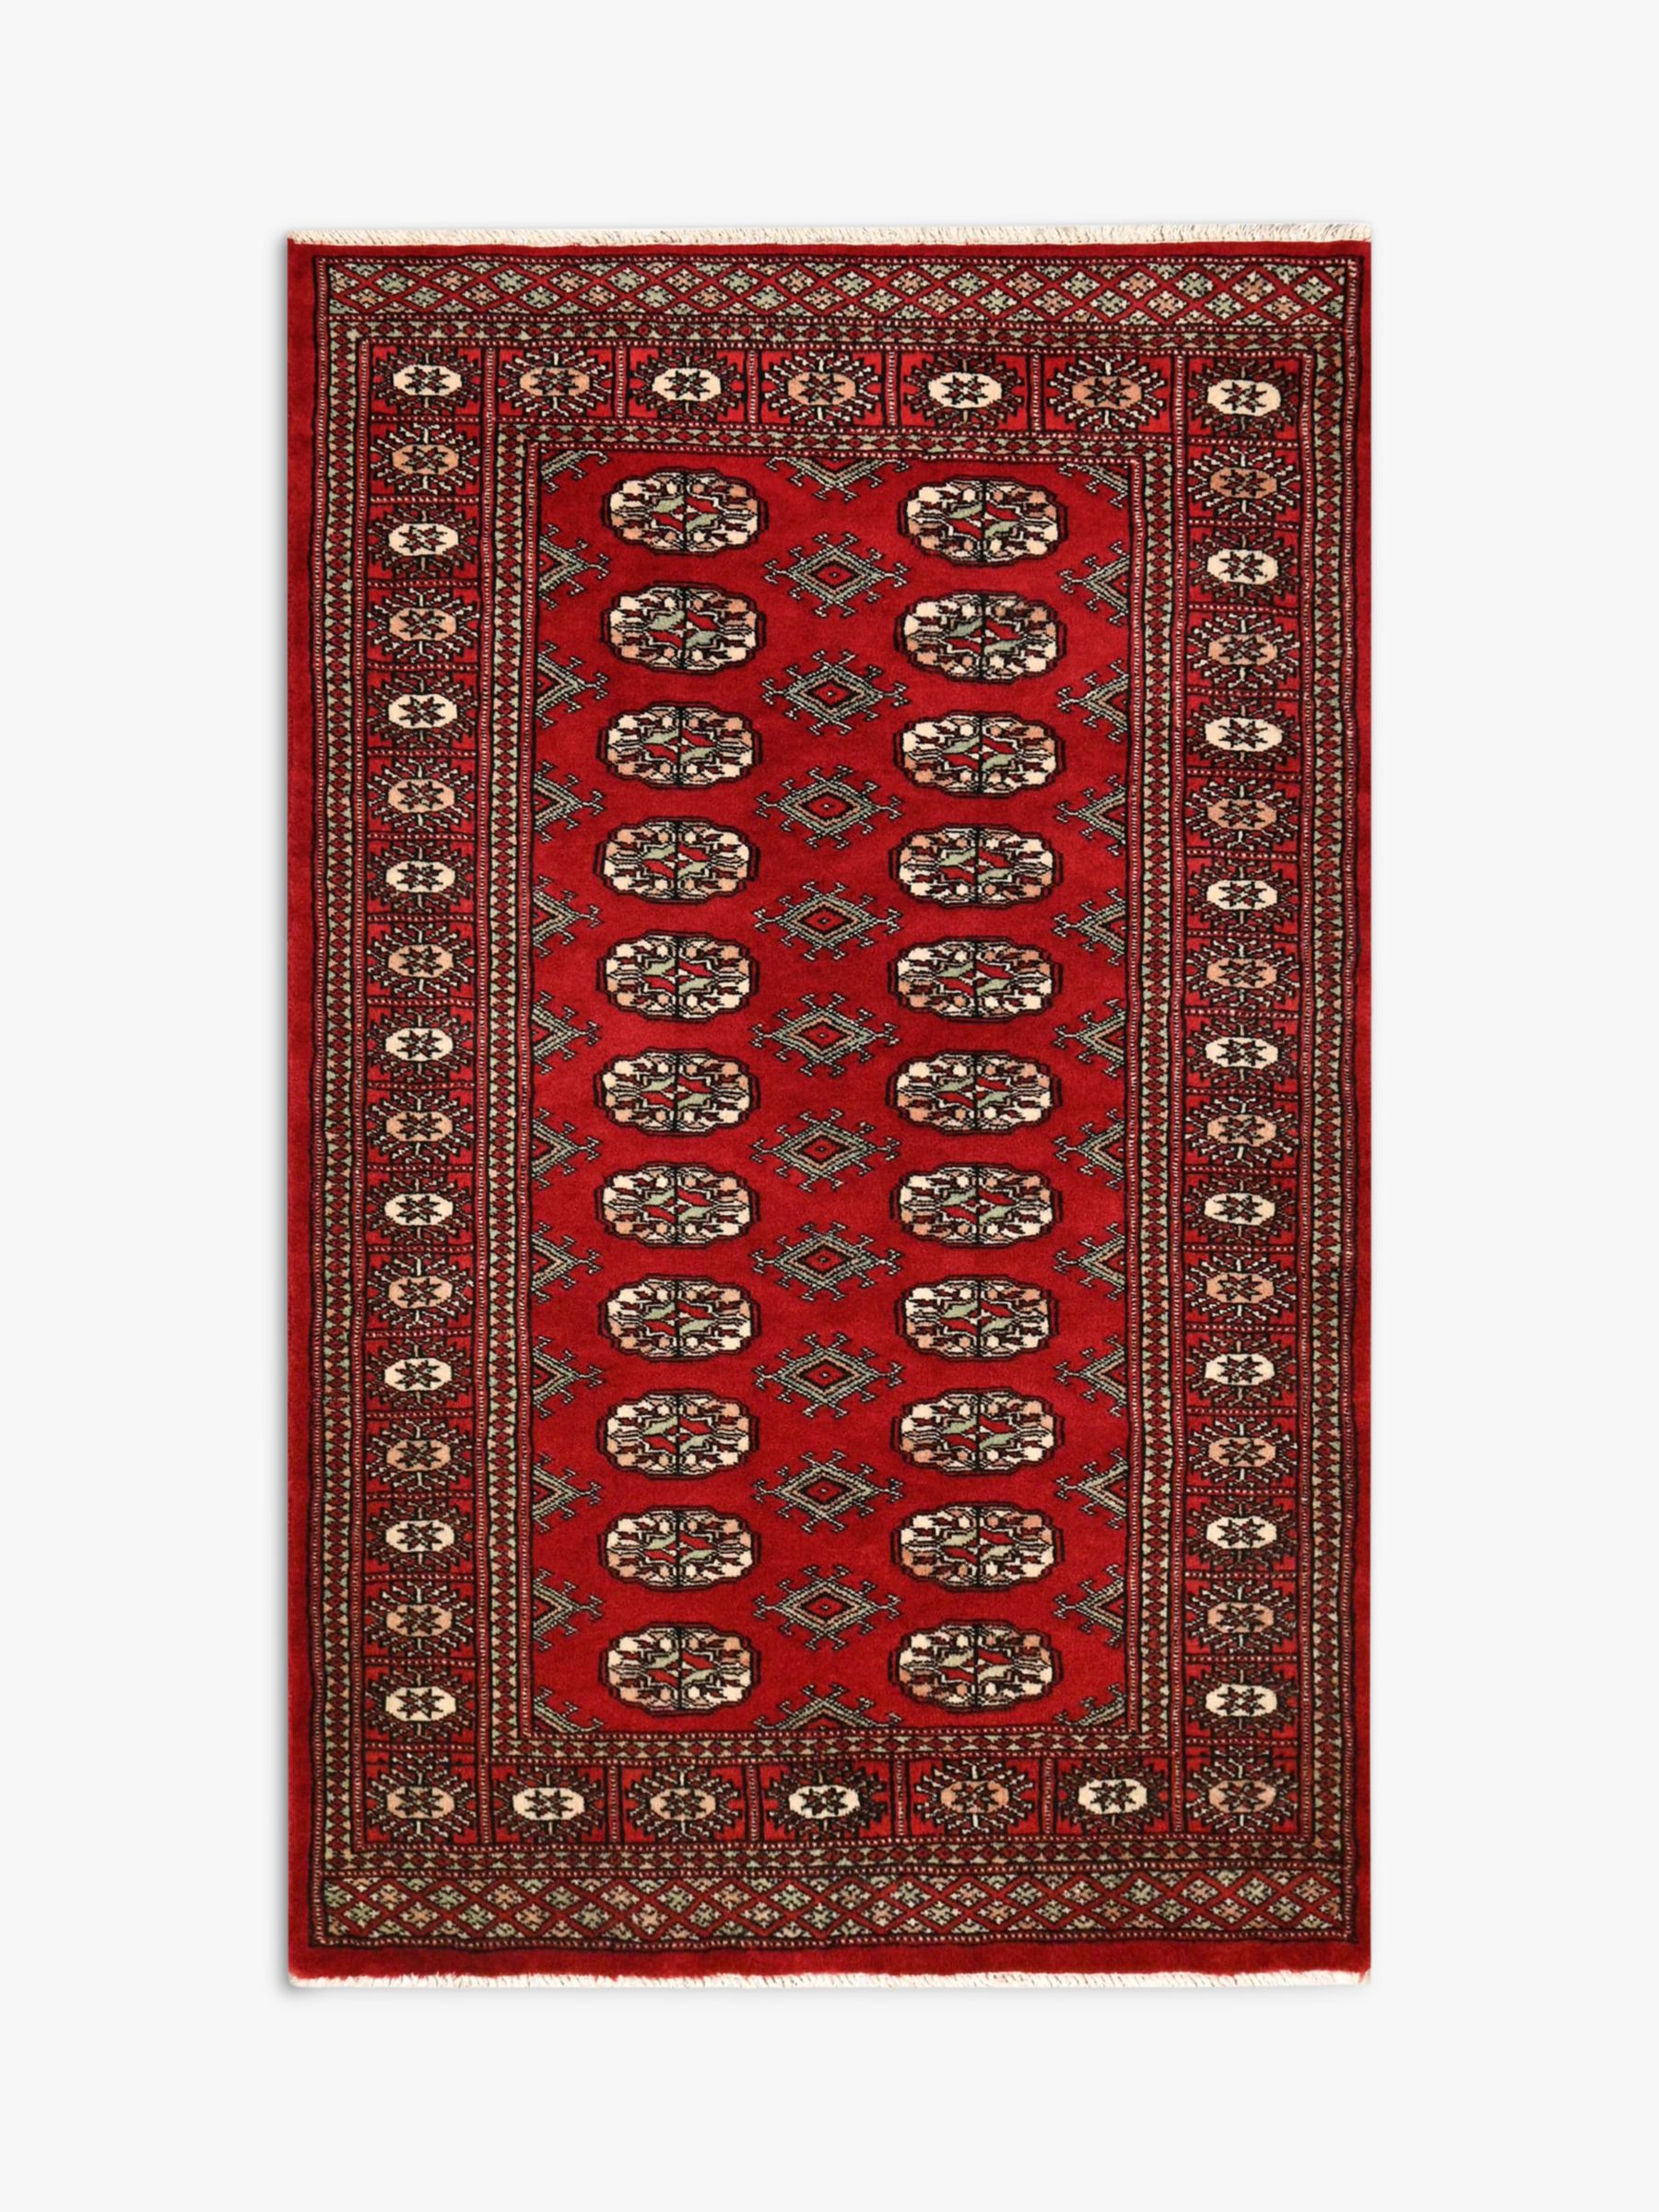 Pakistan Round Buchara Carpet 60x60 Hand Knotted Round Beige Patterned a 